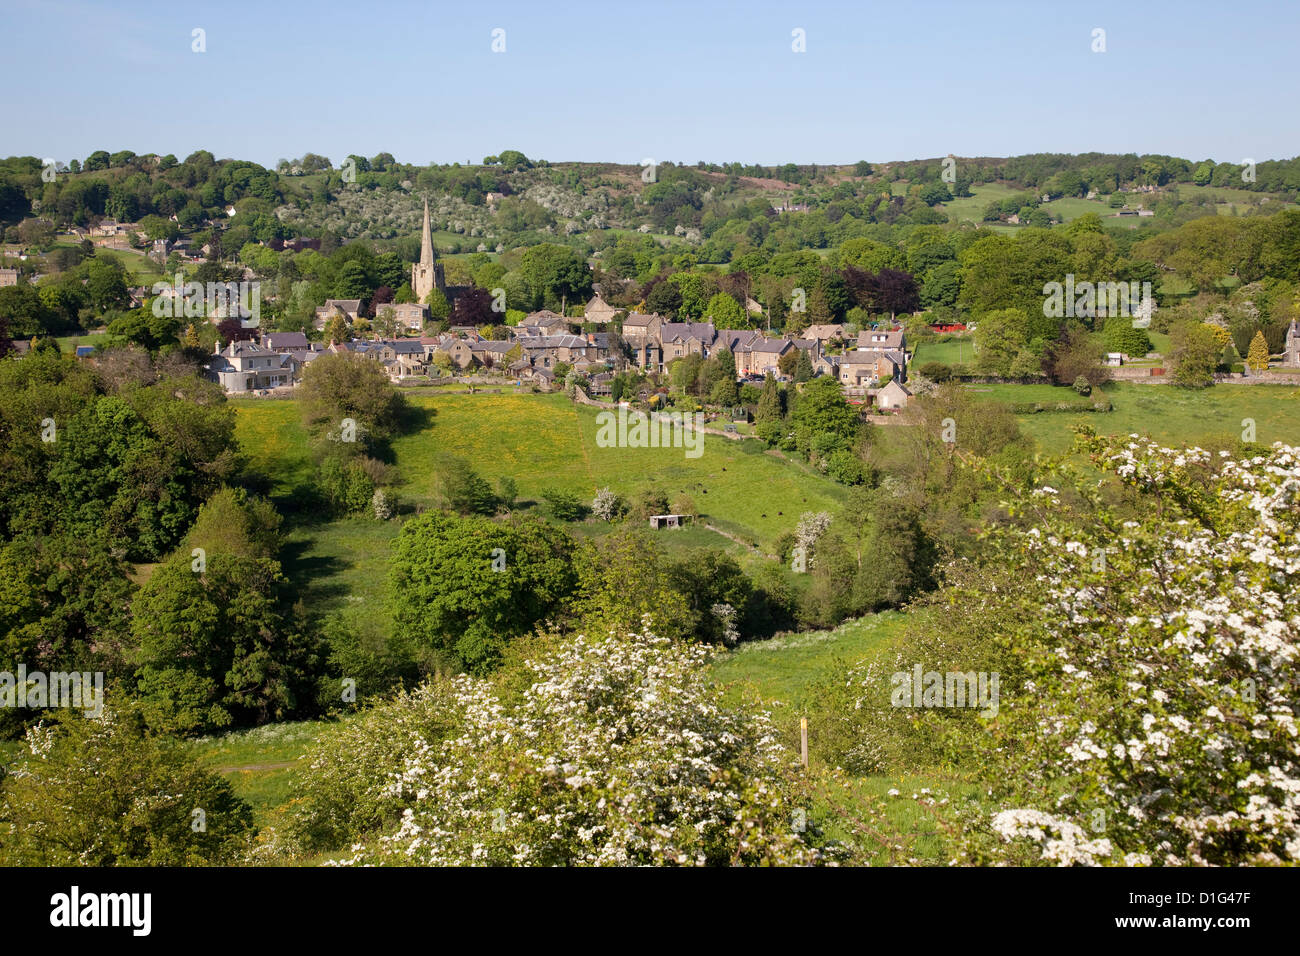 View over village and church, Ashover, Derbyshire, England, United Kingdom, Europe Stock Photo